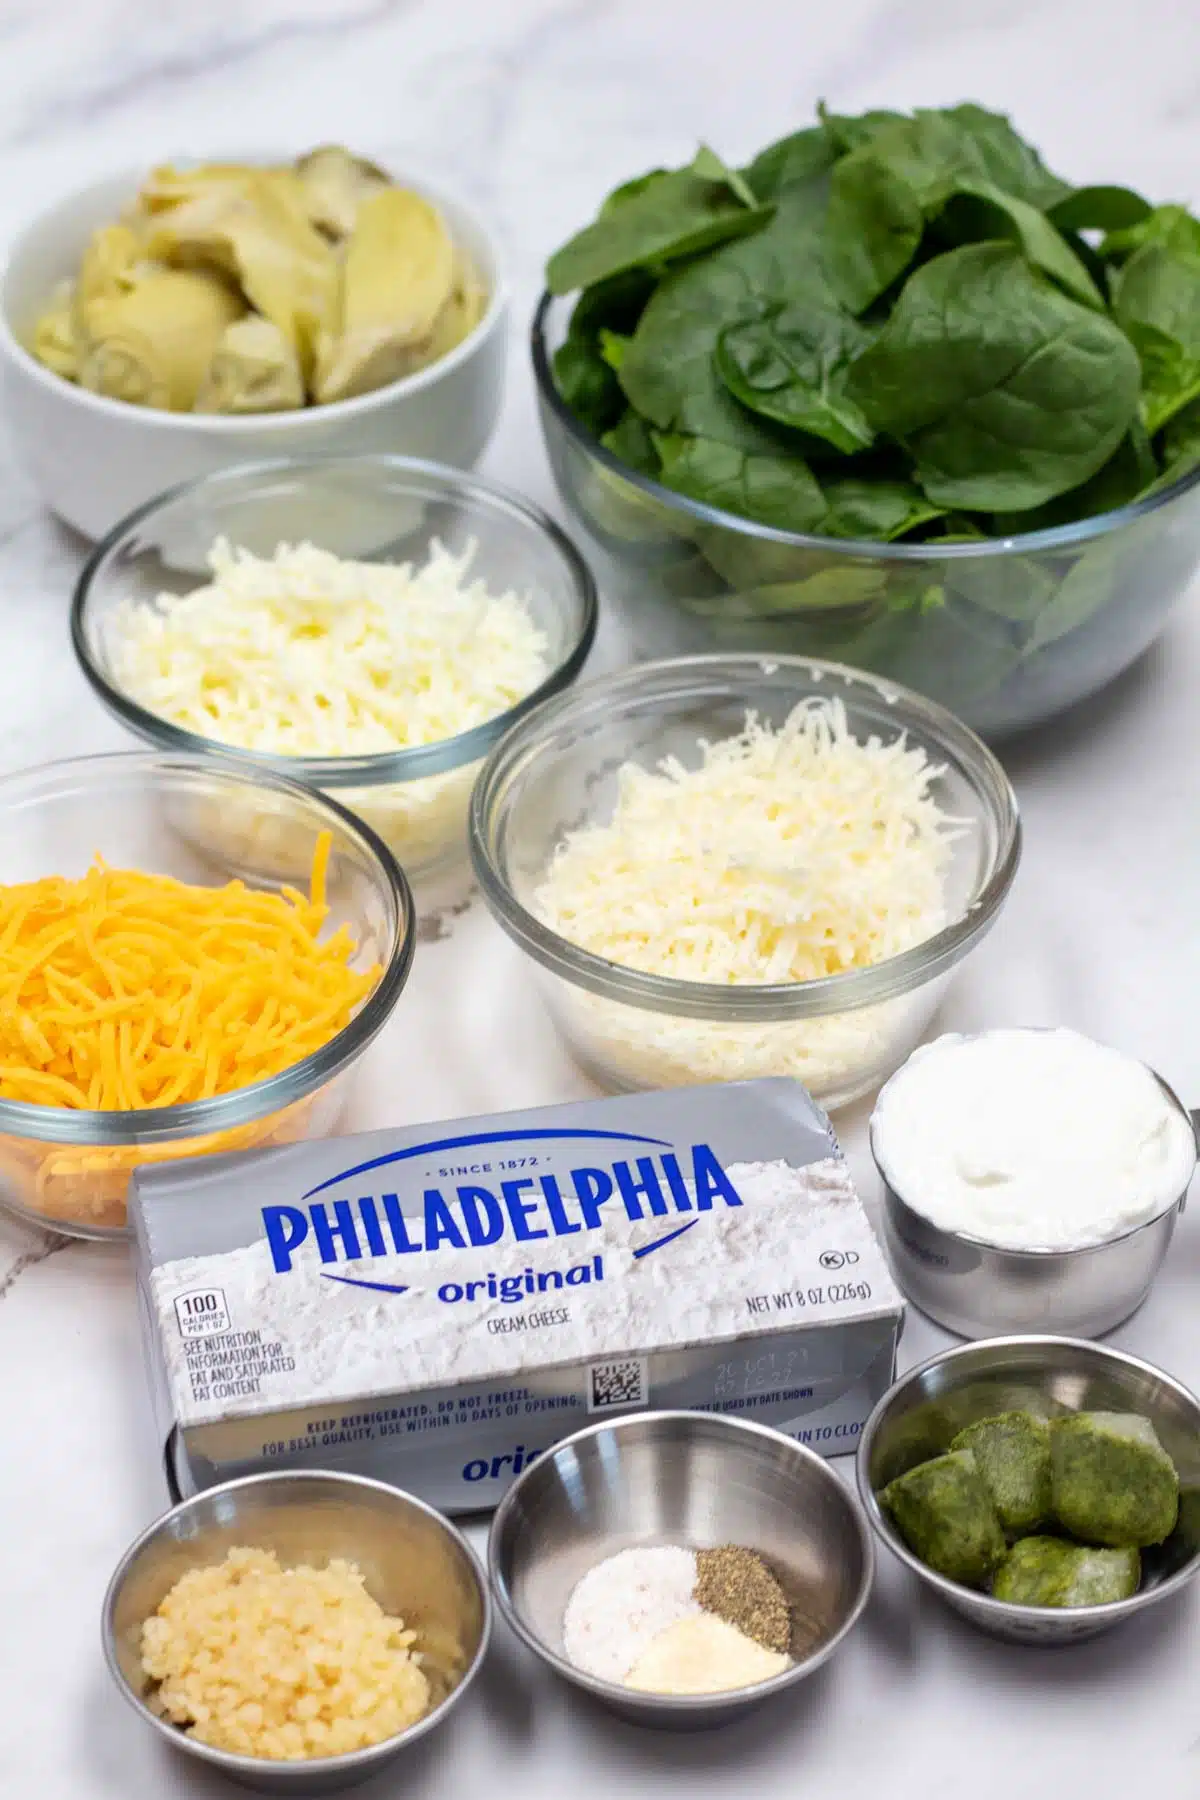 Tall image showing the needed spinach and artichoke dip ingredients.